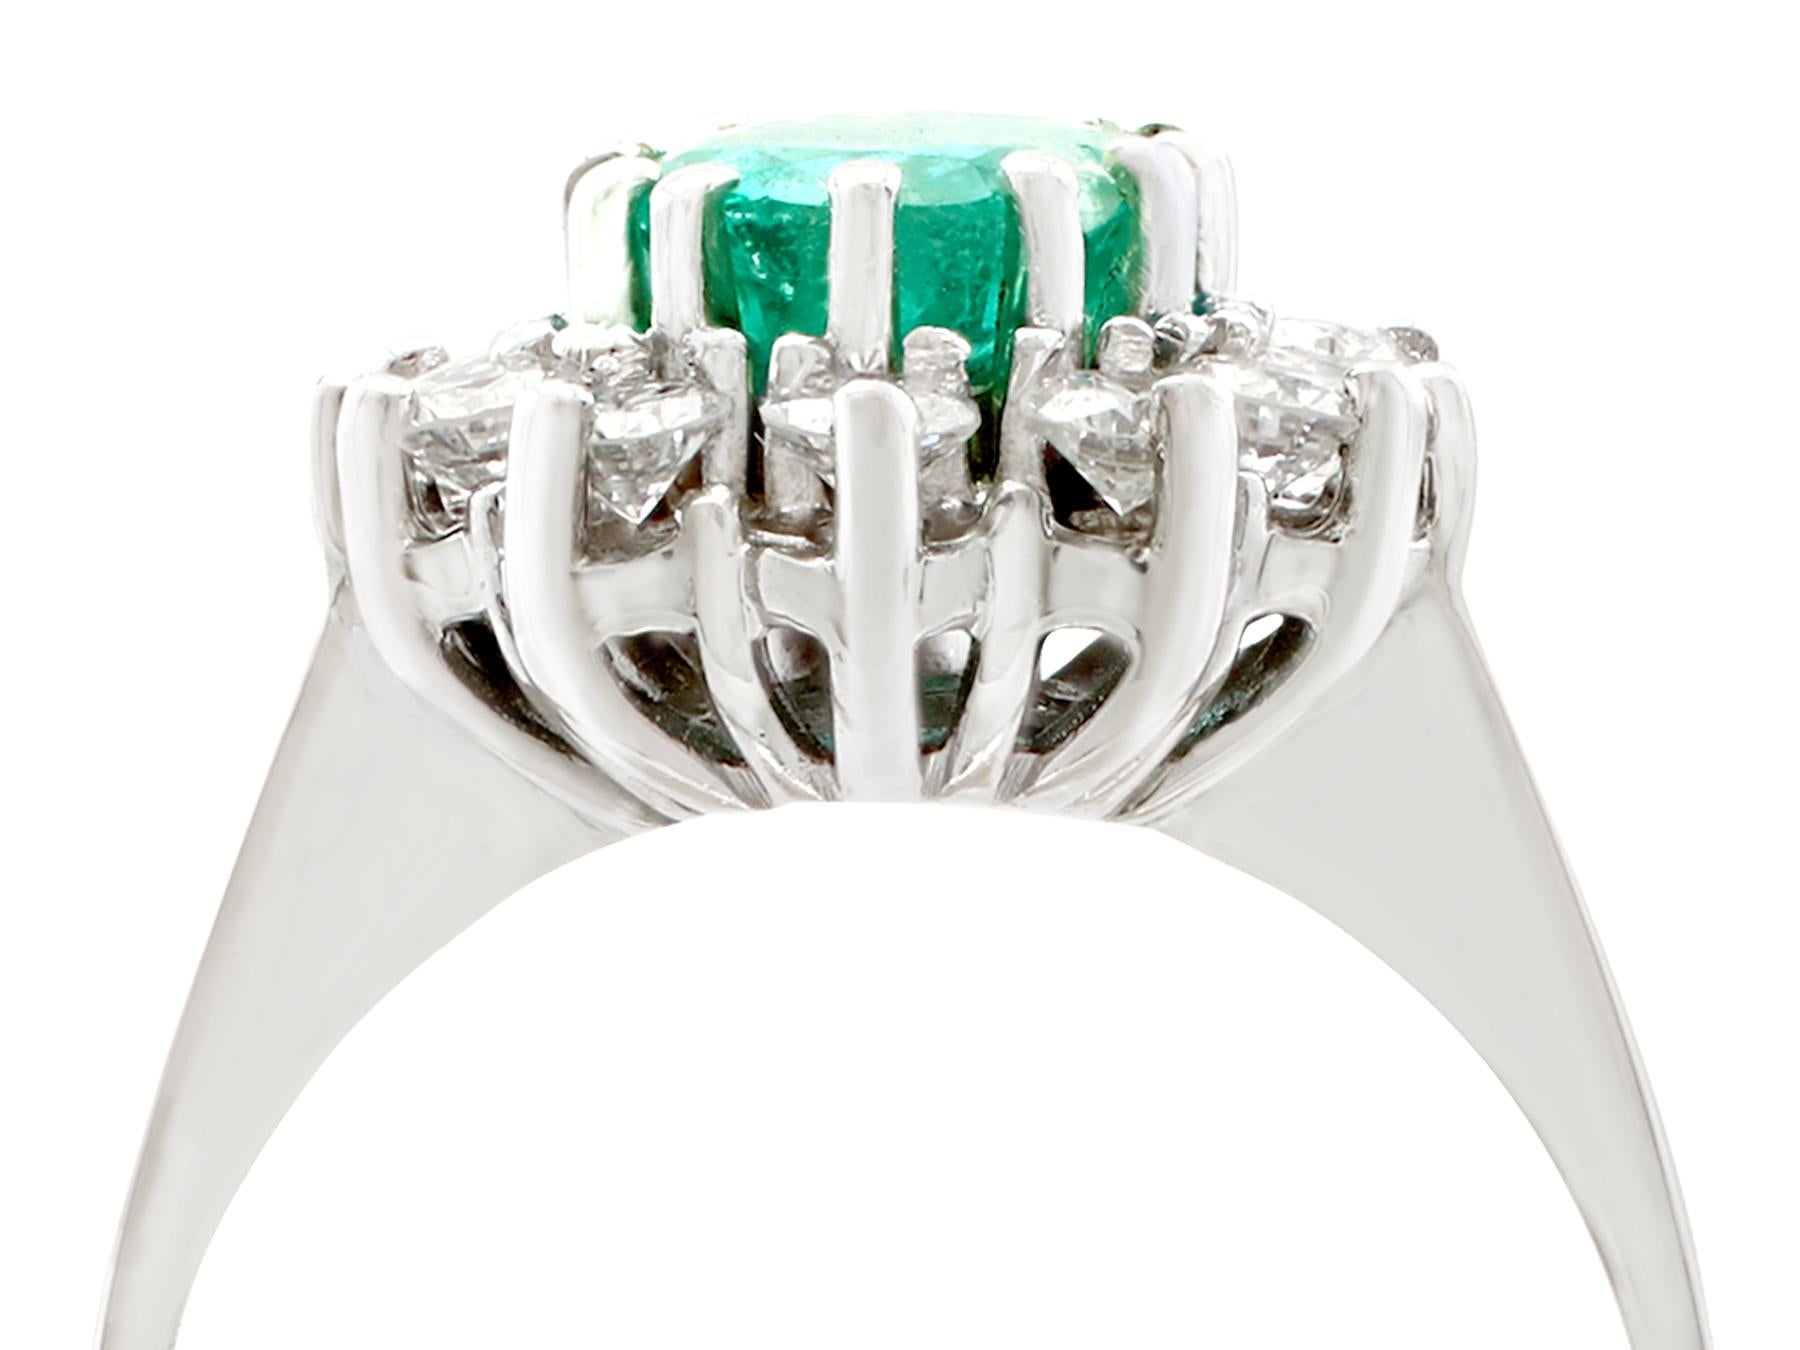 A fine and impressive 1.50 carat natural emerald and 1.12 carat diamond, 14kwhite gold vintage cocktail ring; an addition to our vintage jewellery and estate jewelry collections.

This impressive vintage cocktail ring has been crafted in 14k white